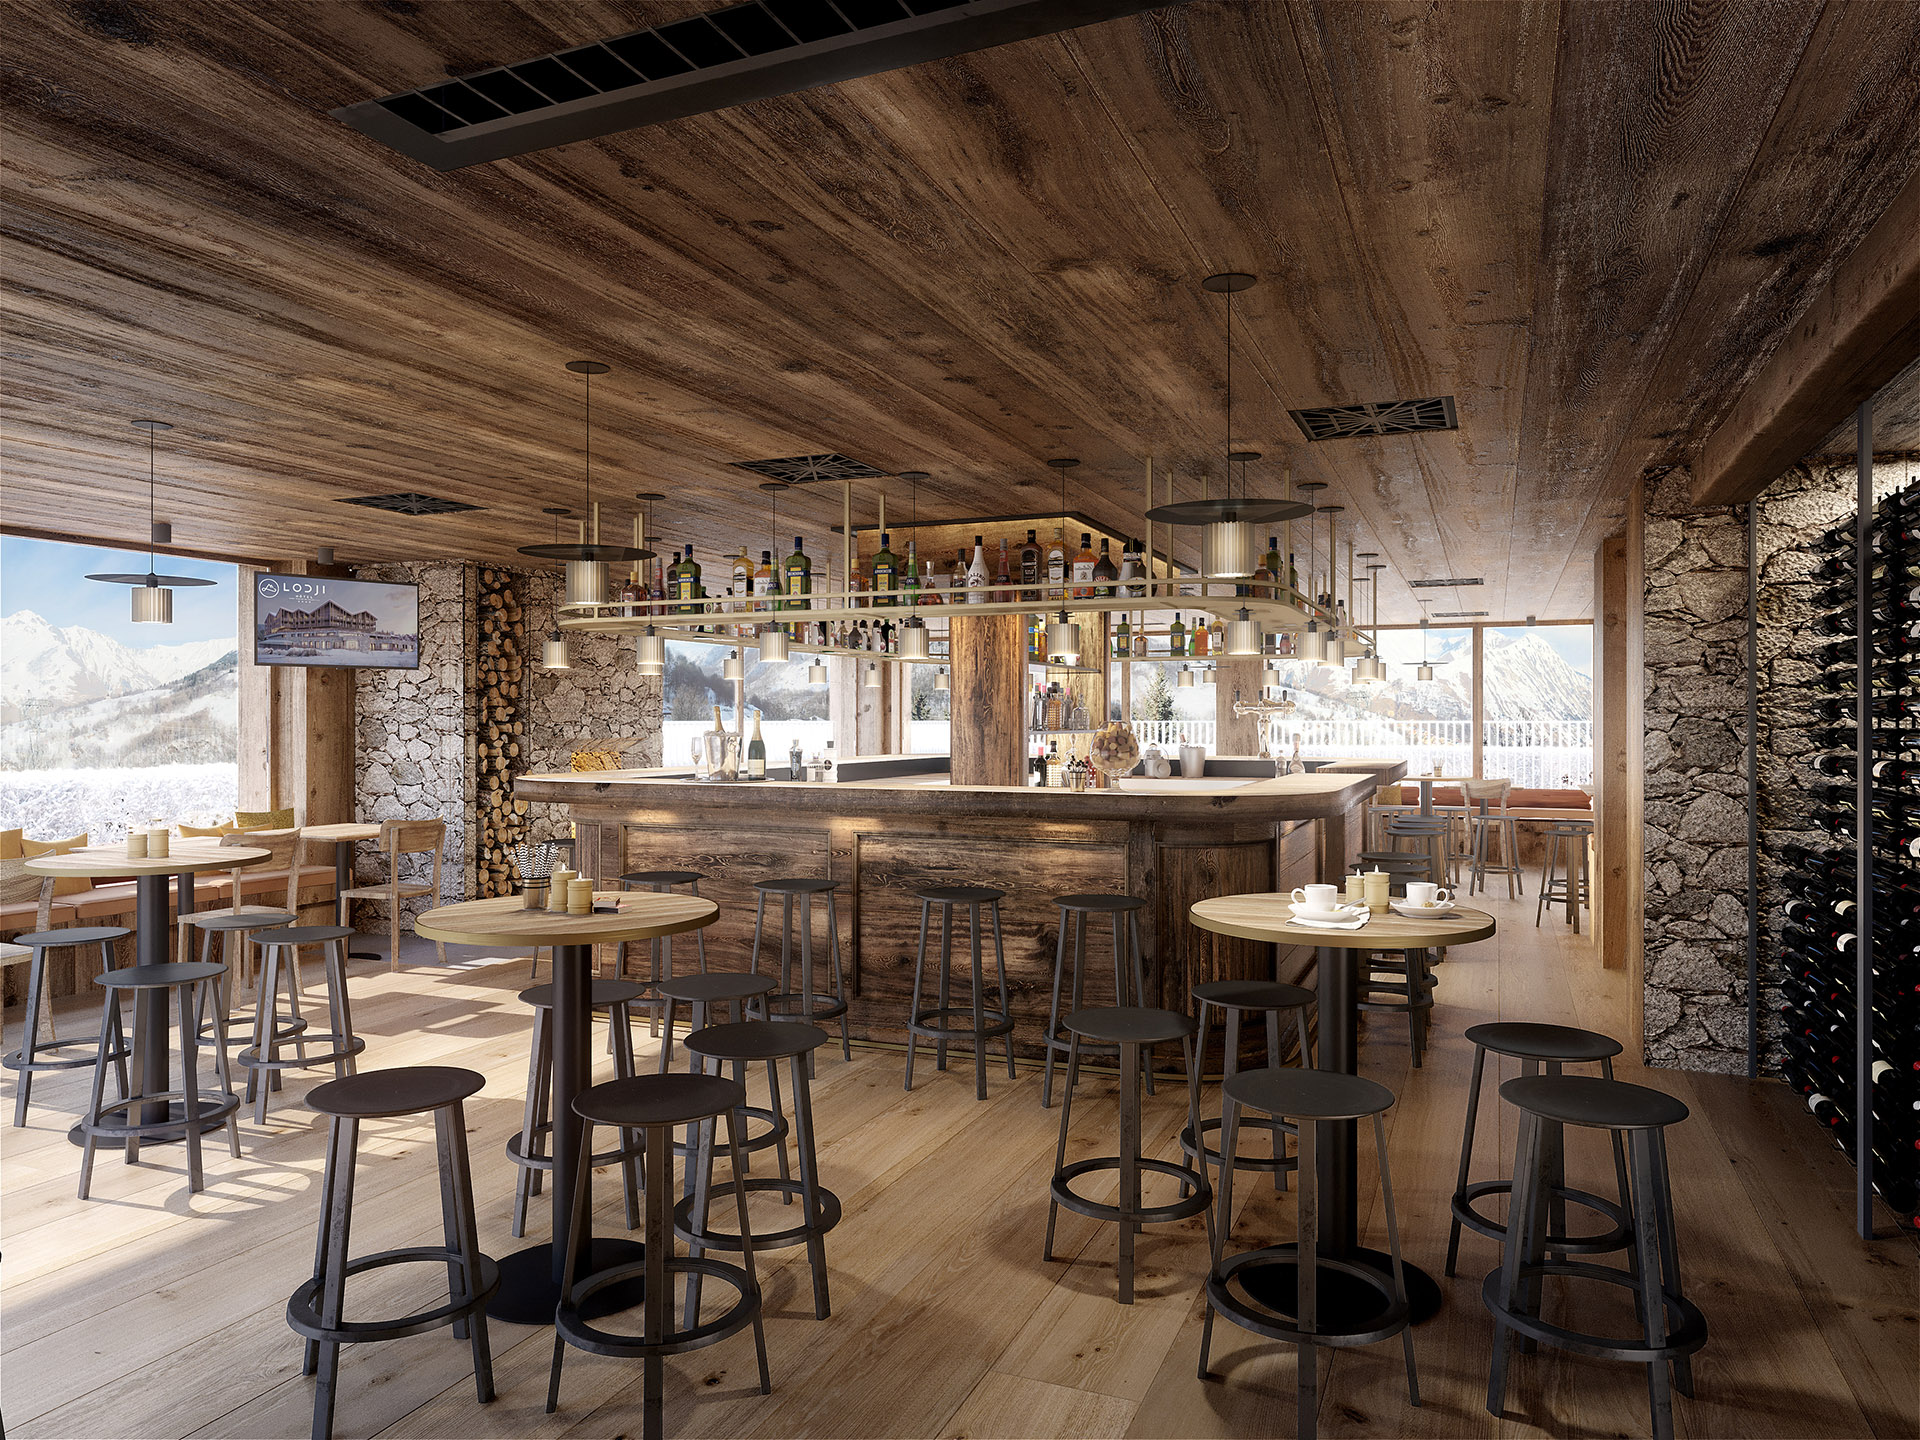 3D creation of the interior of a rustic mountain bar